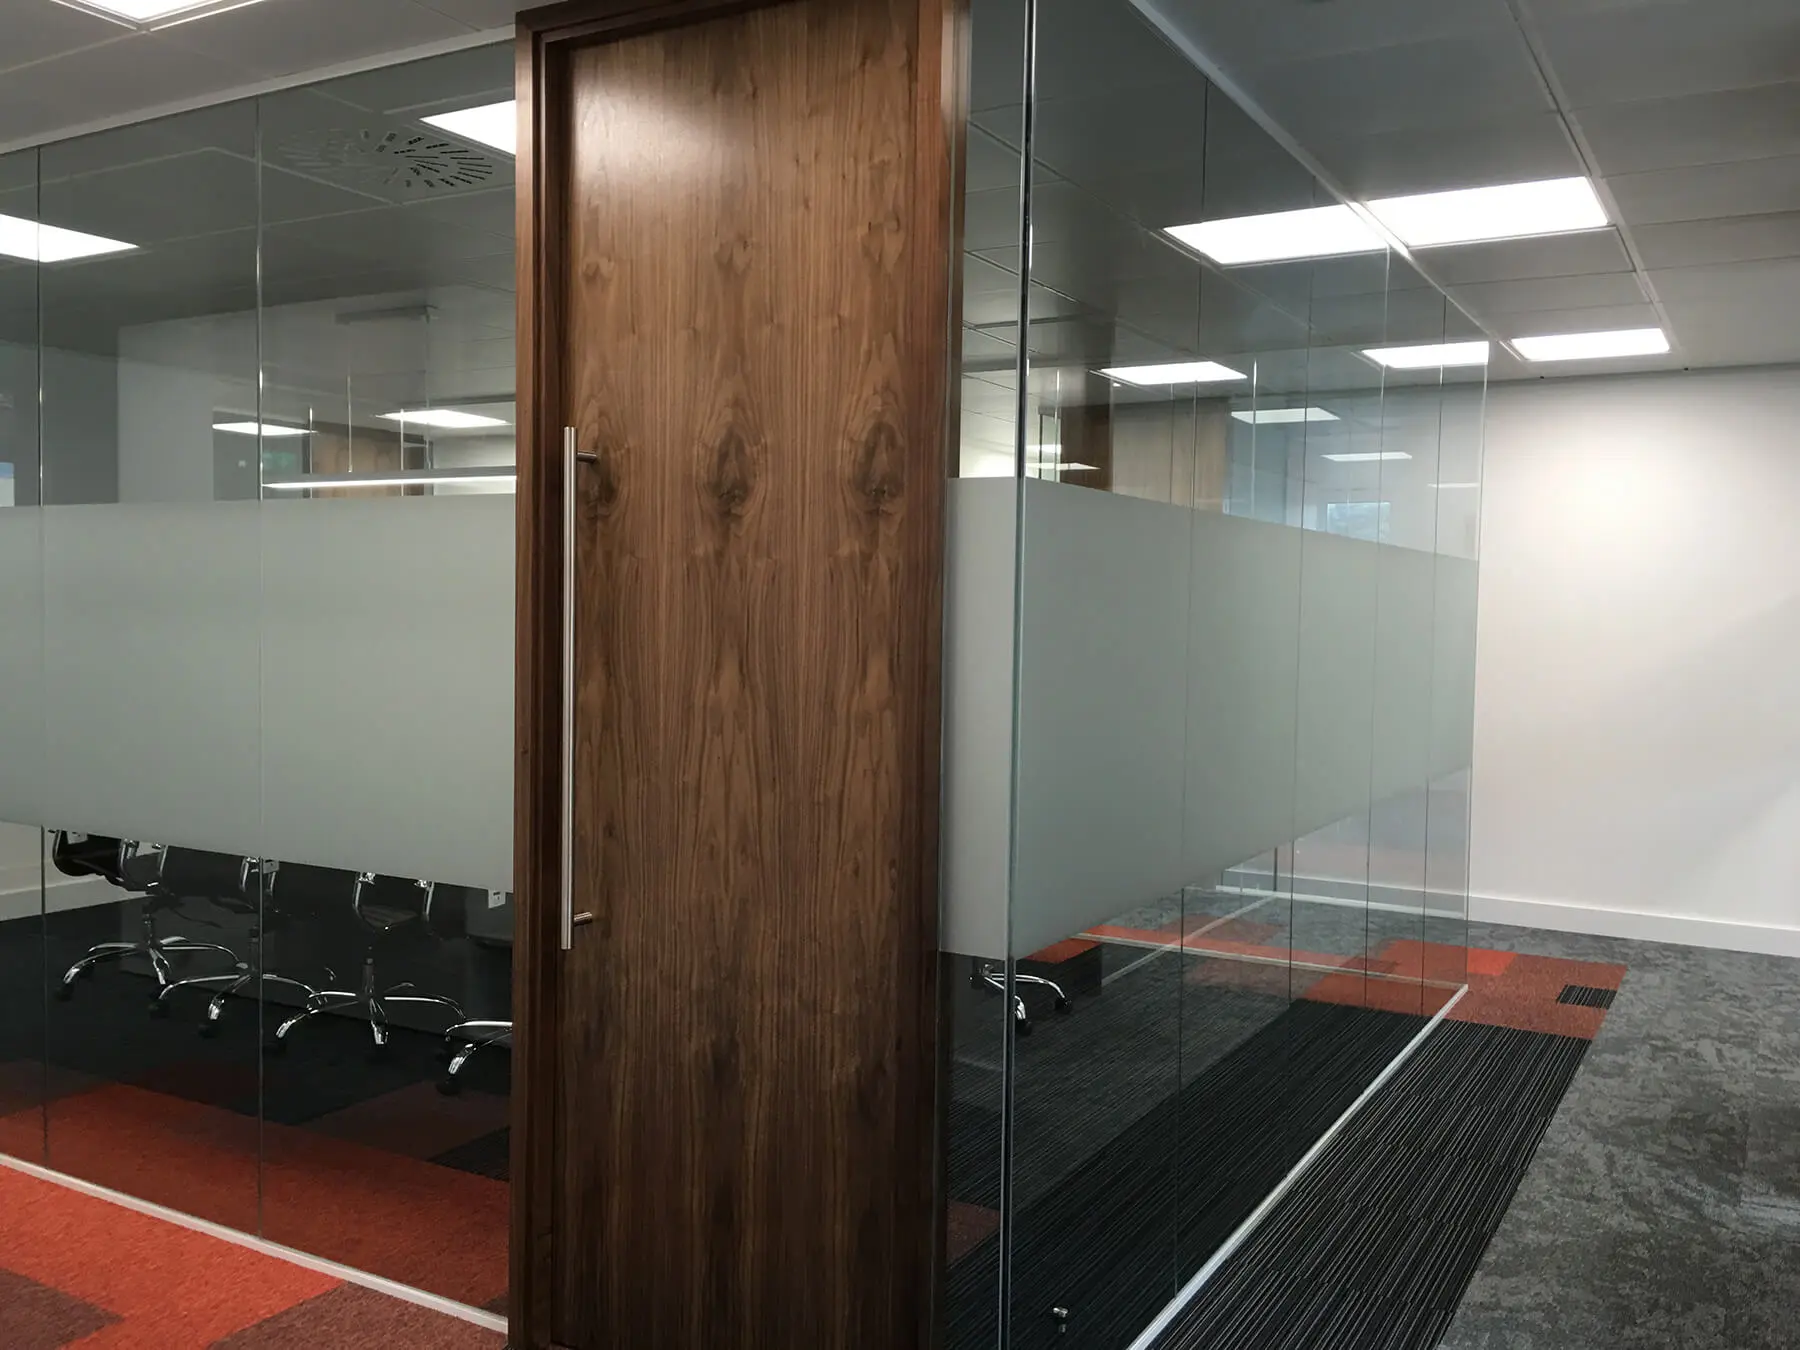 Meeting room with glass manifestation and wood door